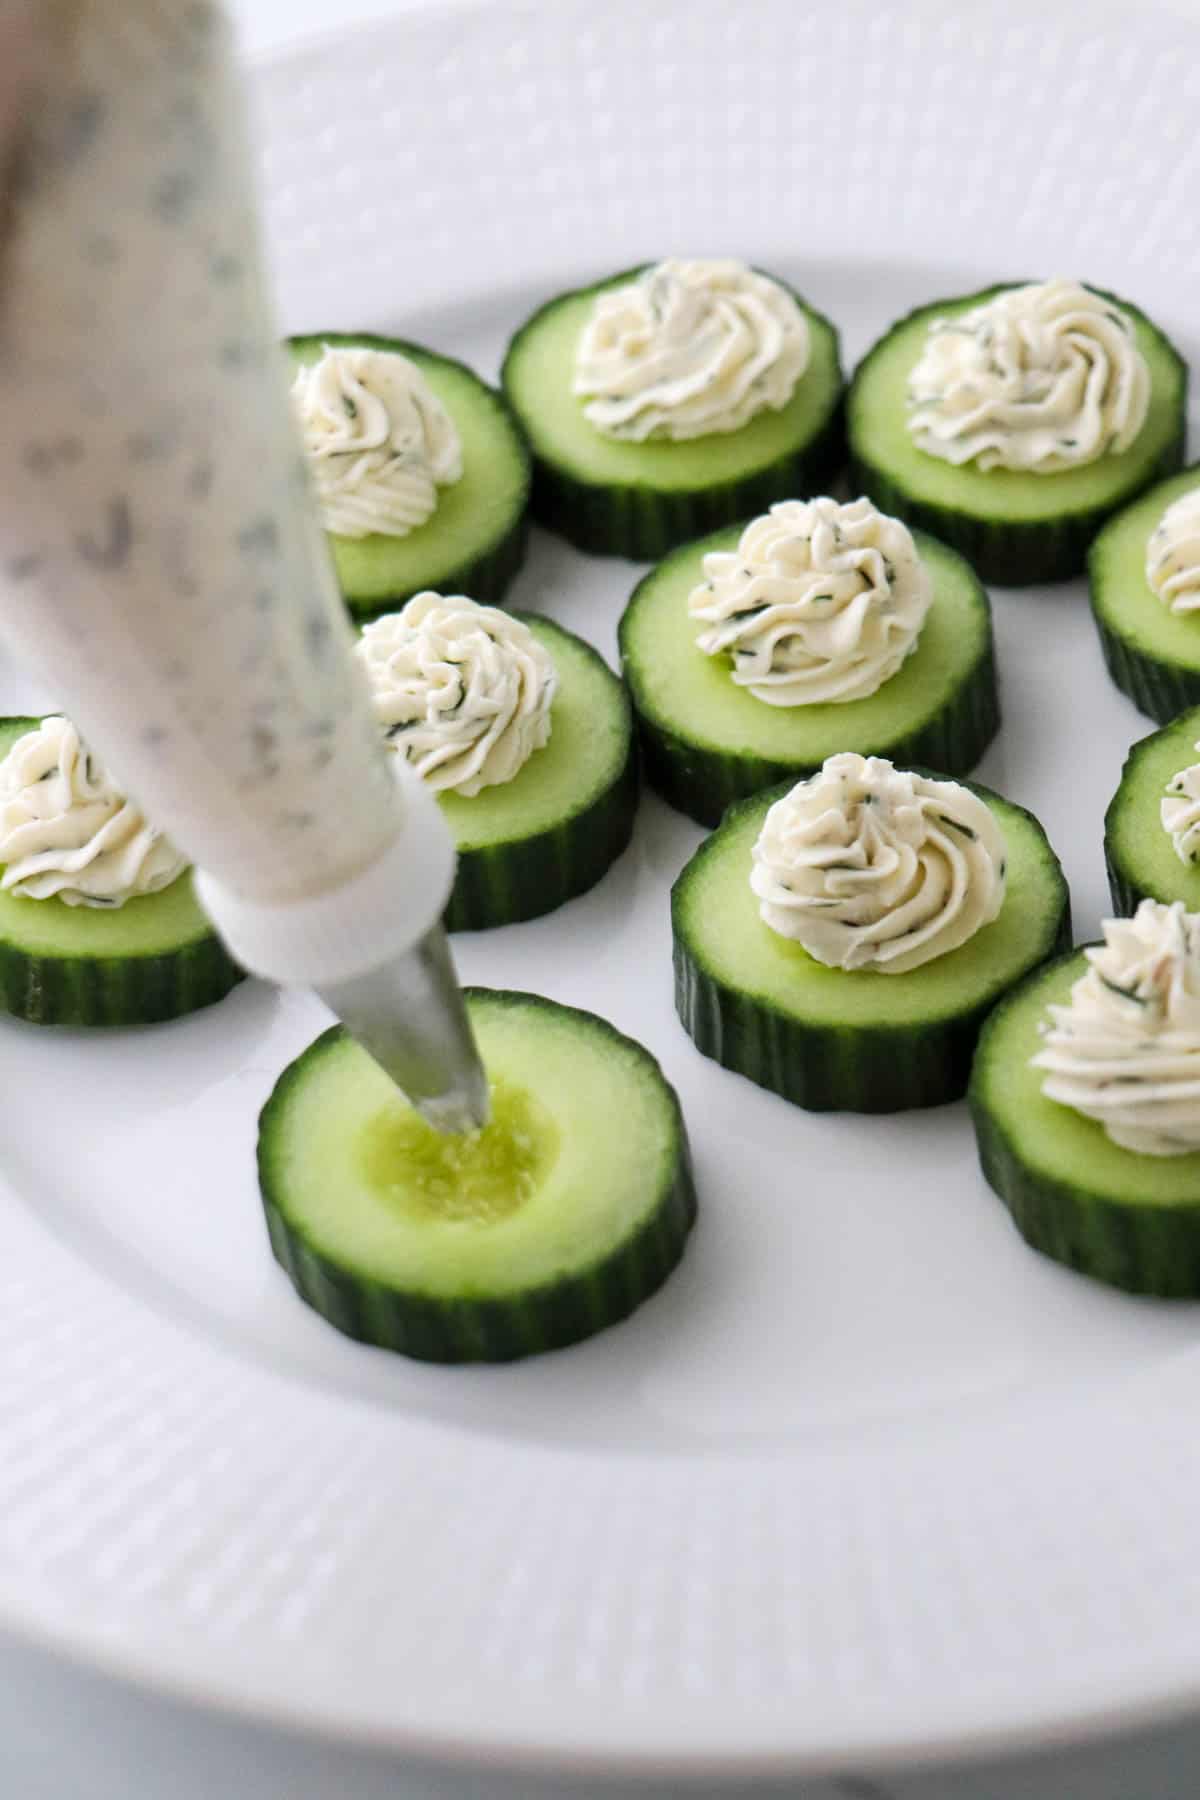 Person piping cream cheese onto cucumber rounds.